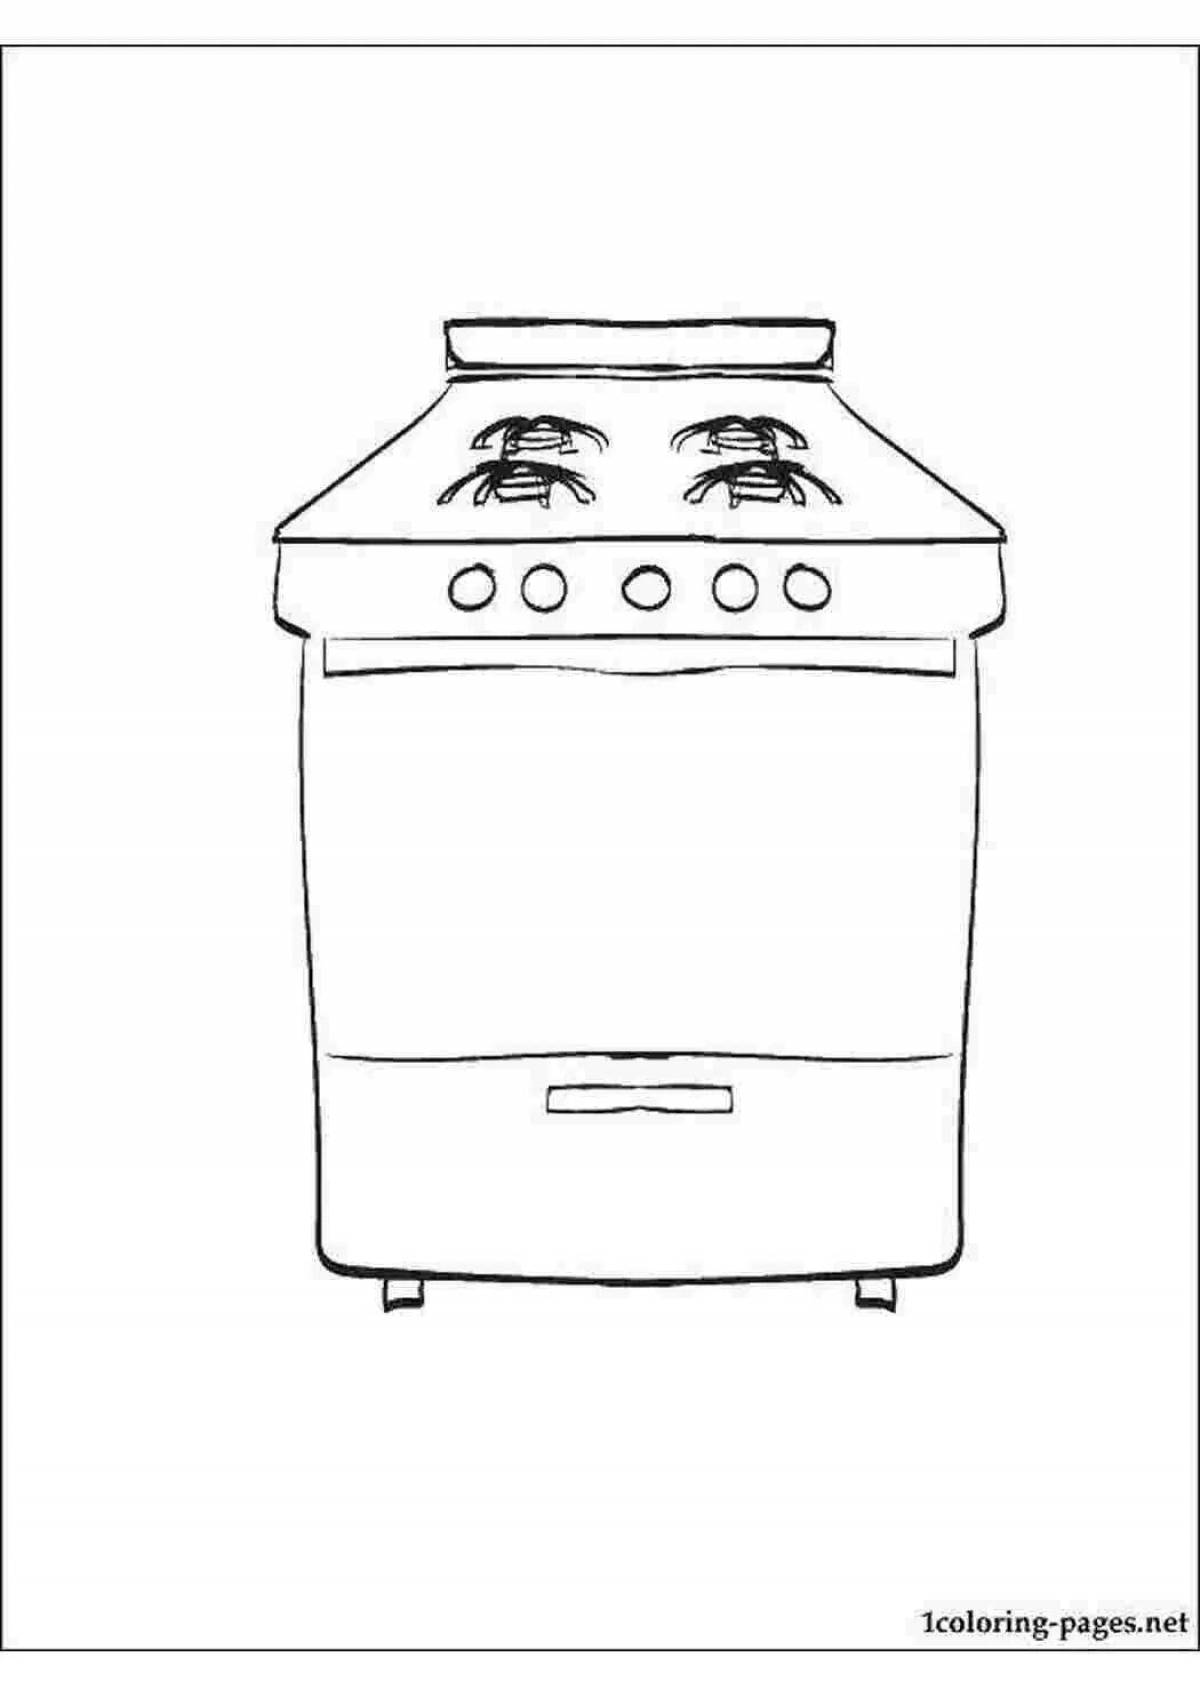 Colorful kitchen stove coloring page